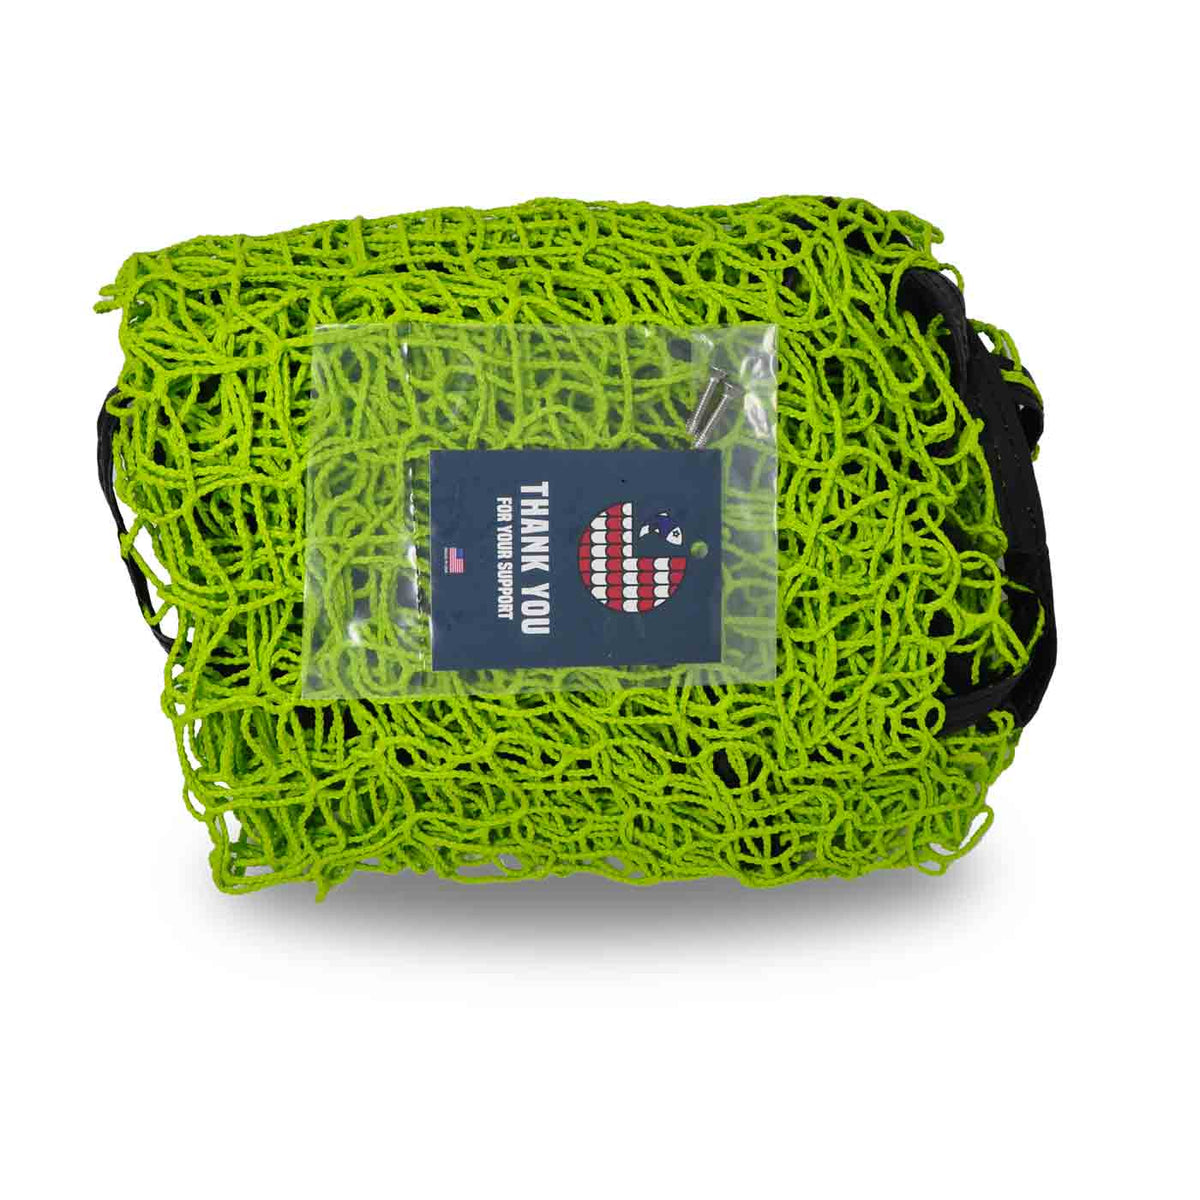 RS Nets USA Green Bay Net (Shipping Included) – WB Musky Shop